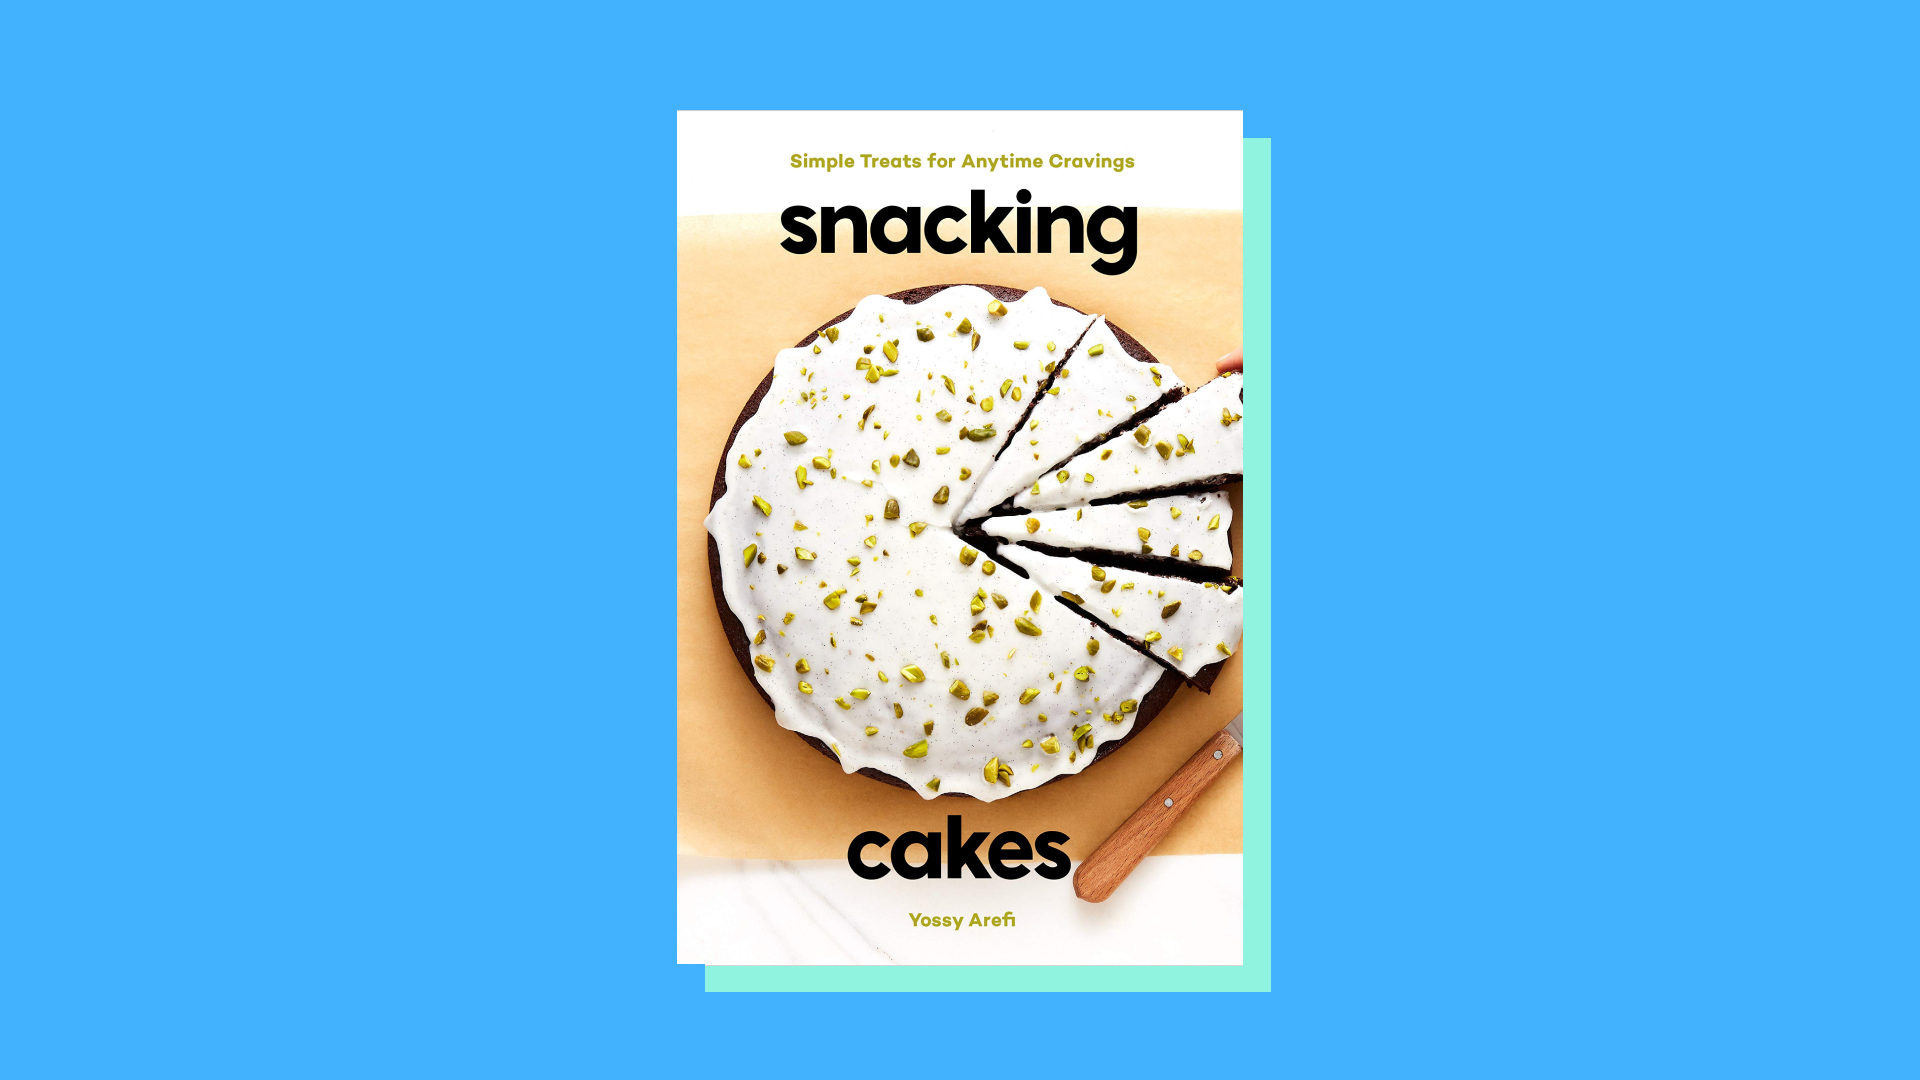 “Snacking Cakes: Simple Treats for Anytime Cravings” by Yossy Arefi